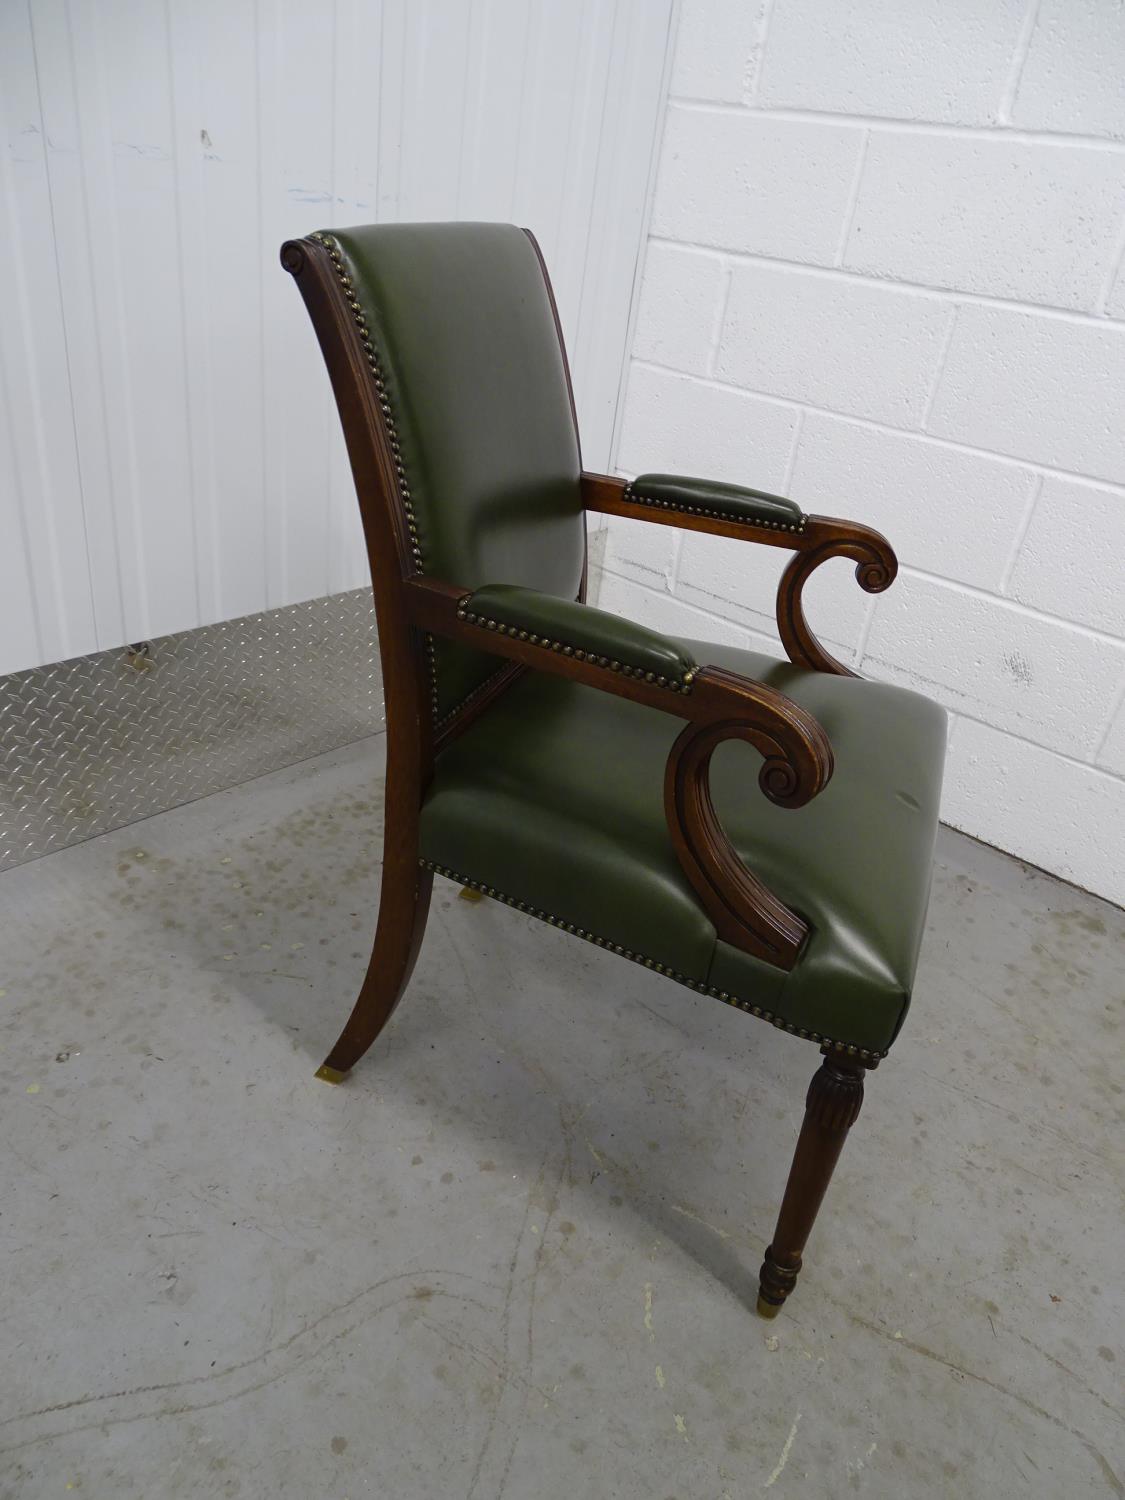 Leather open arm chair - a green leather over stuffed chair, with scroll ended arms, brass capped - Image 3 of 6